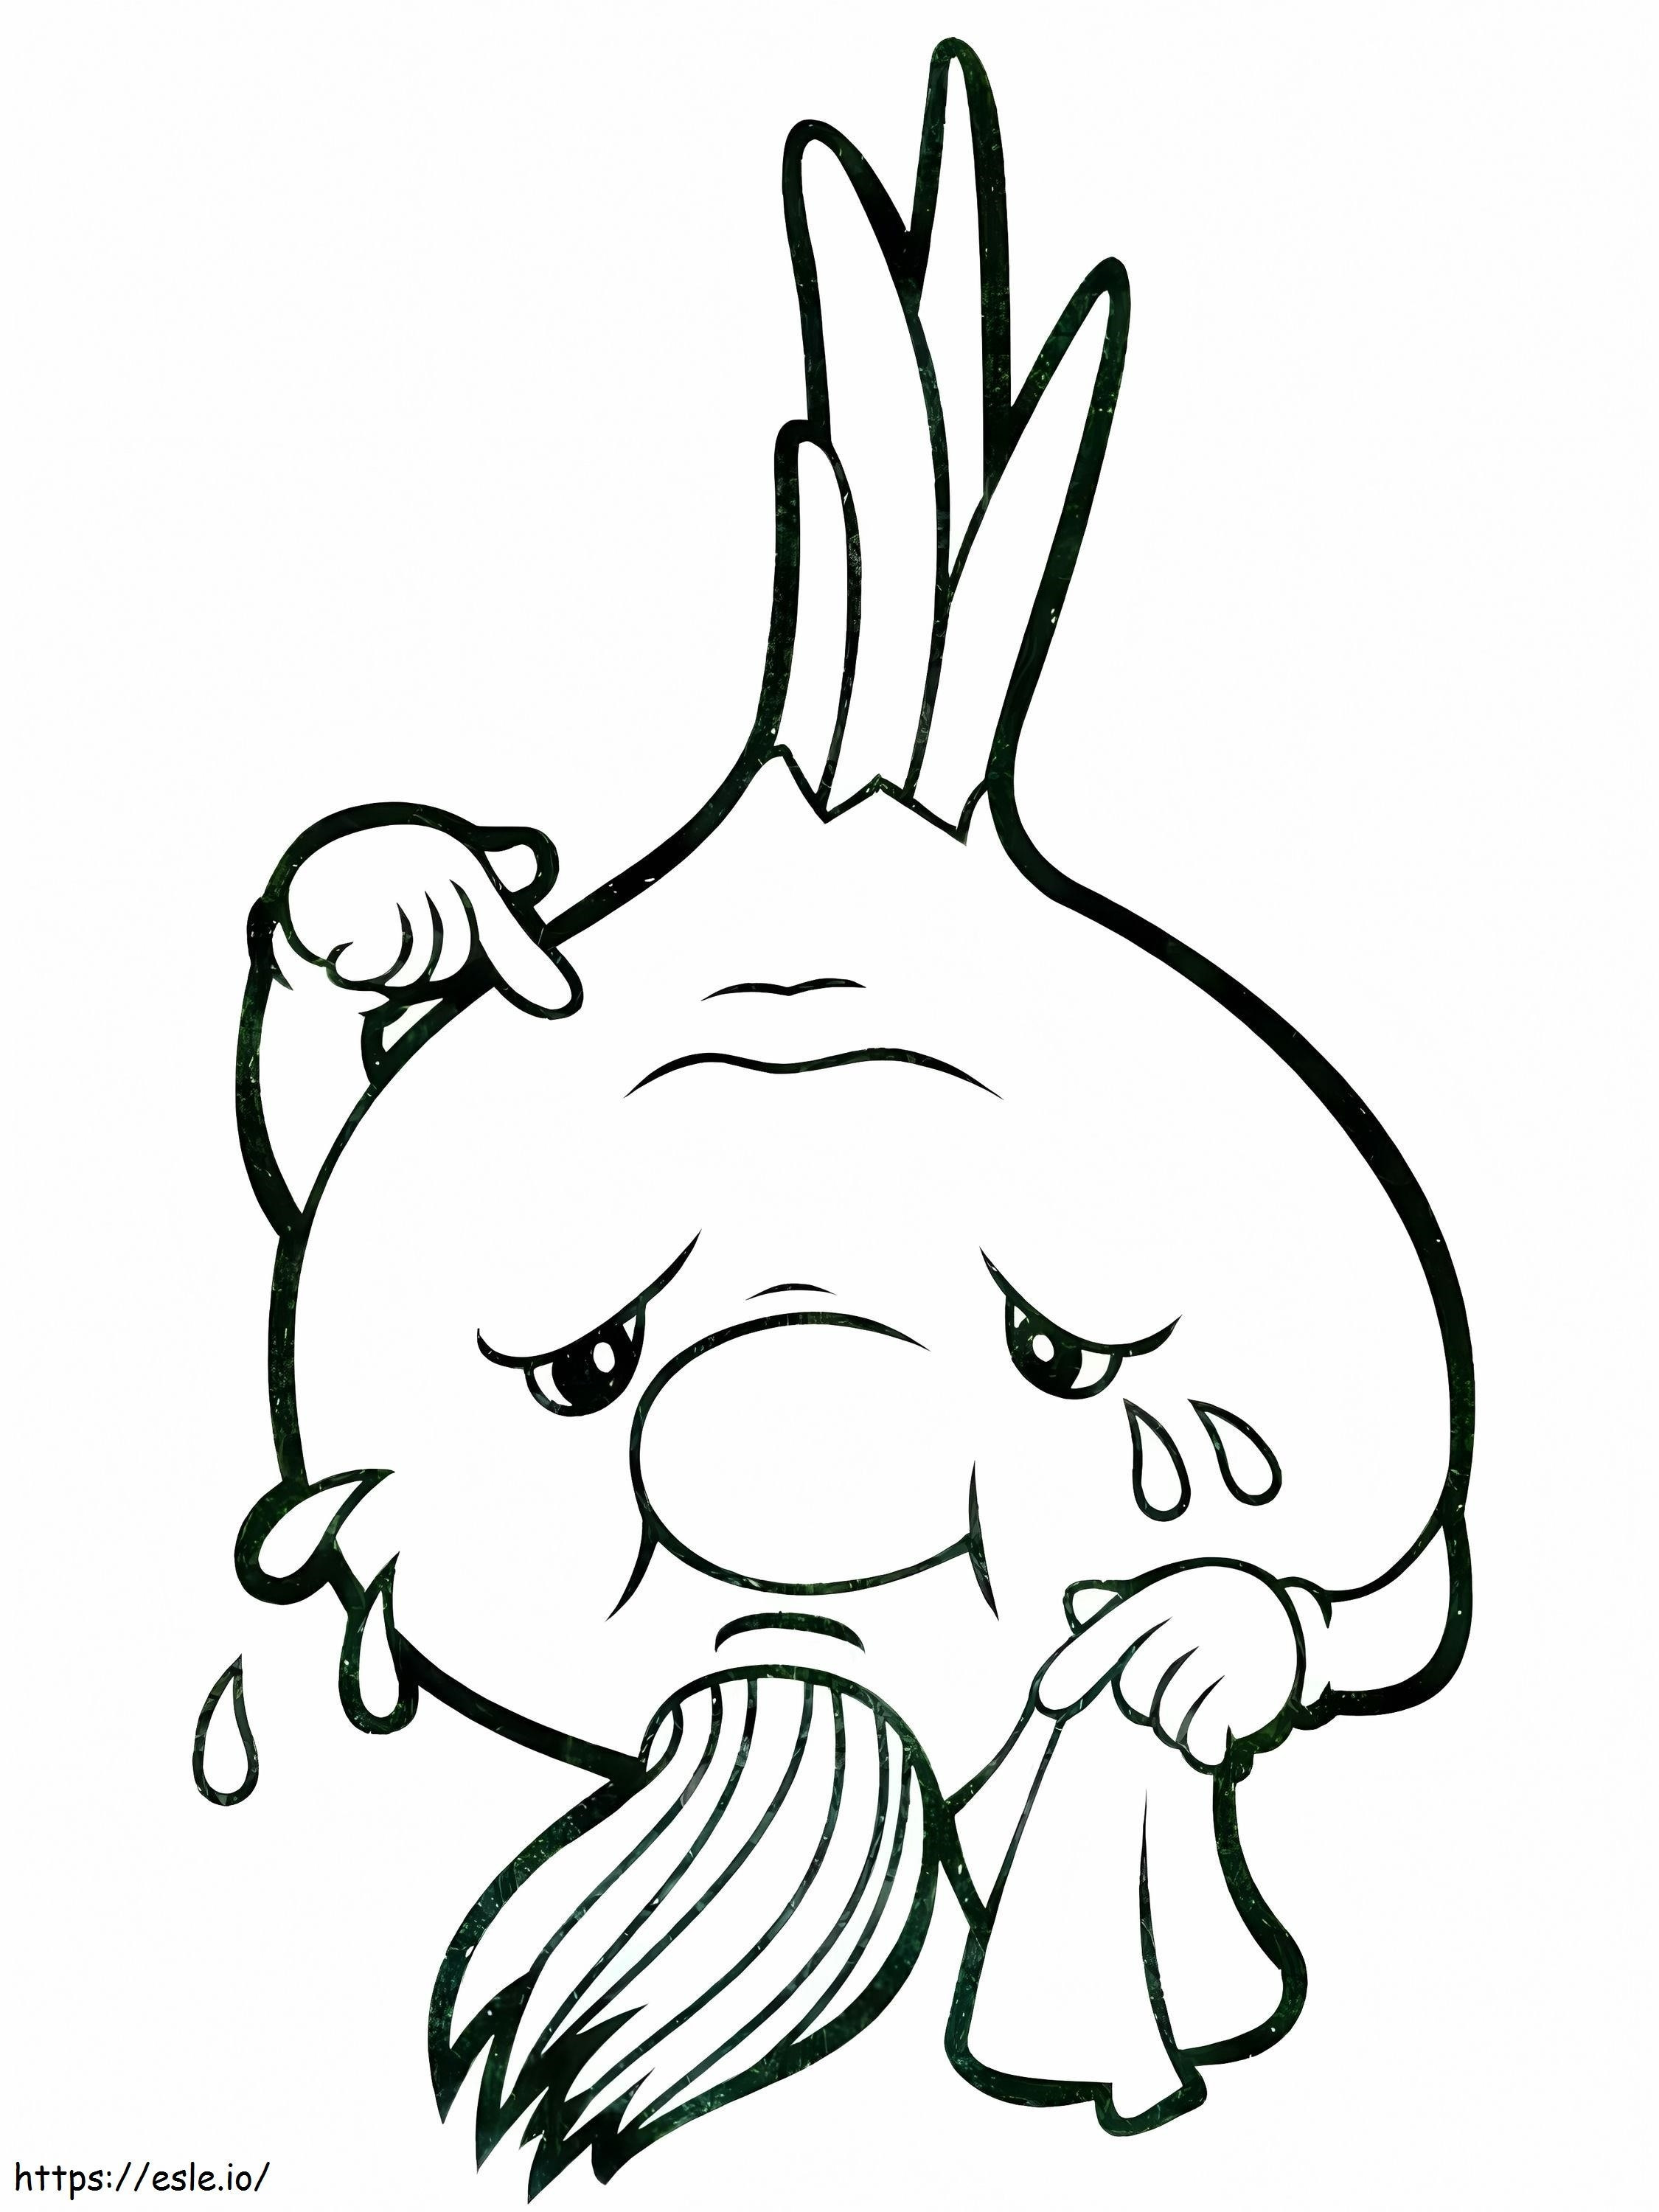 Crying Old Onion coloring page